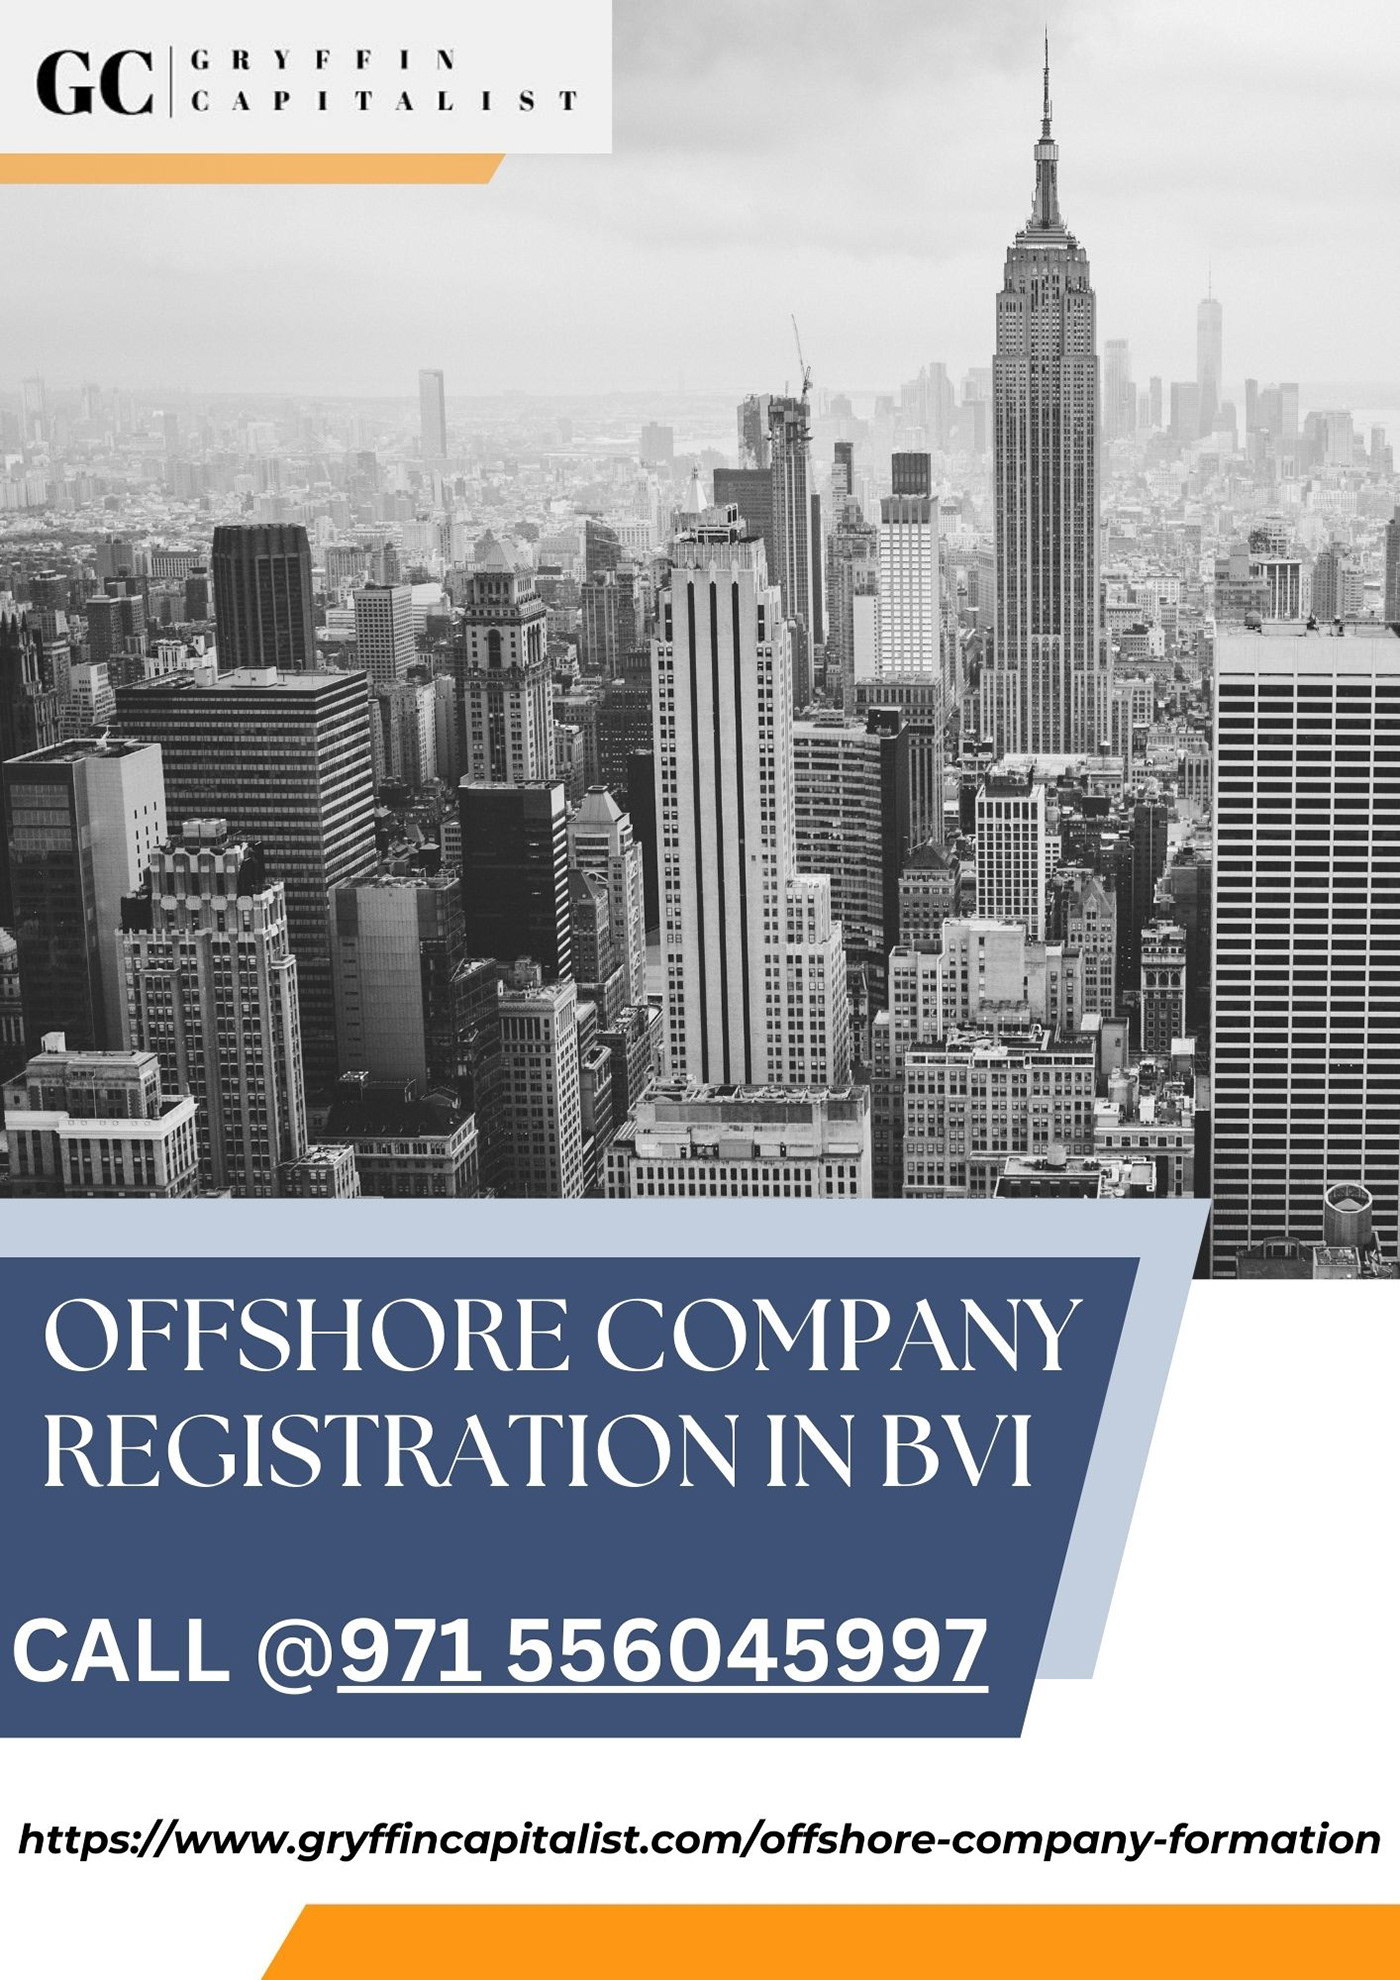 Offshore Company Registration in Bvi